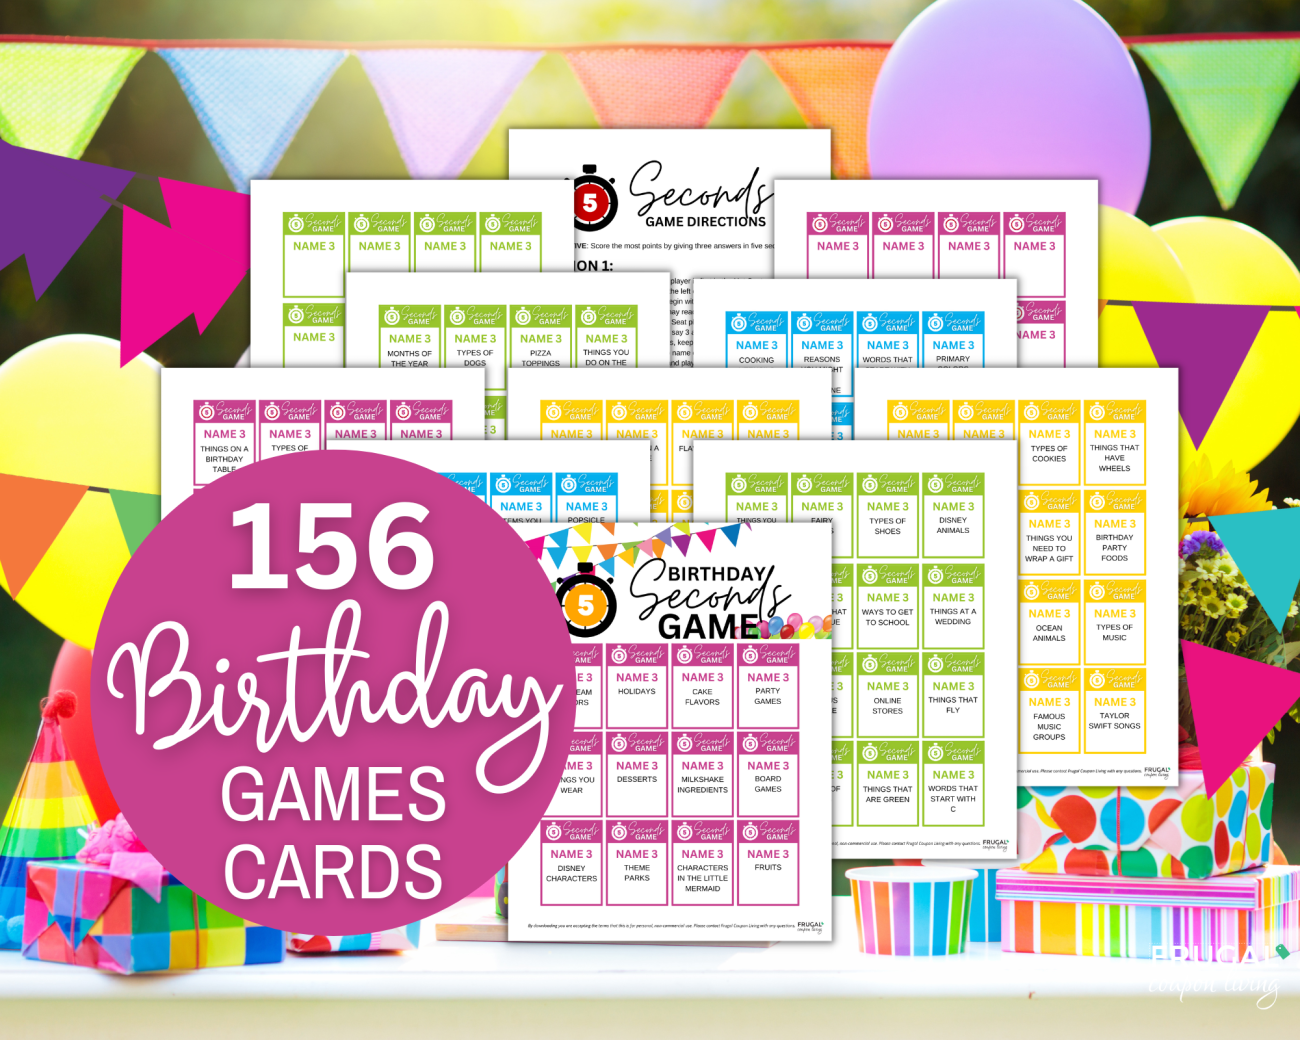 5 second birthday party games